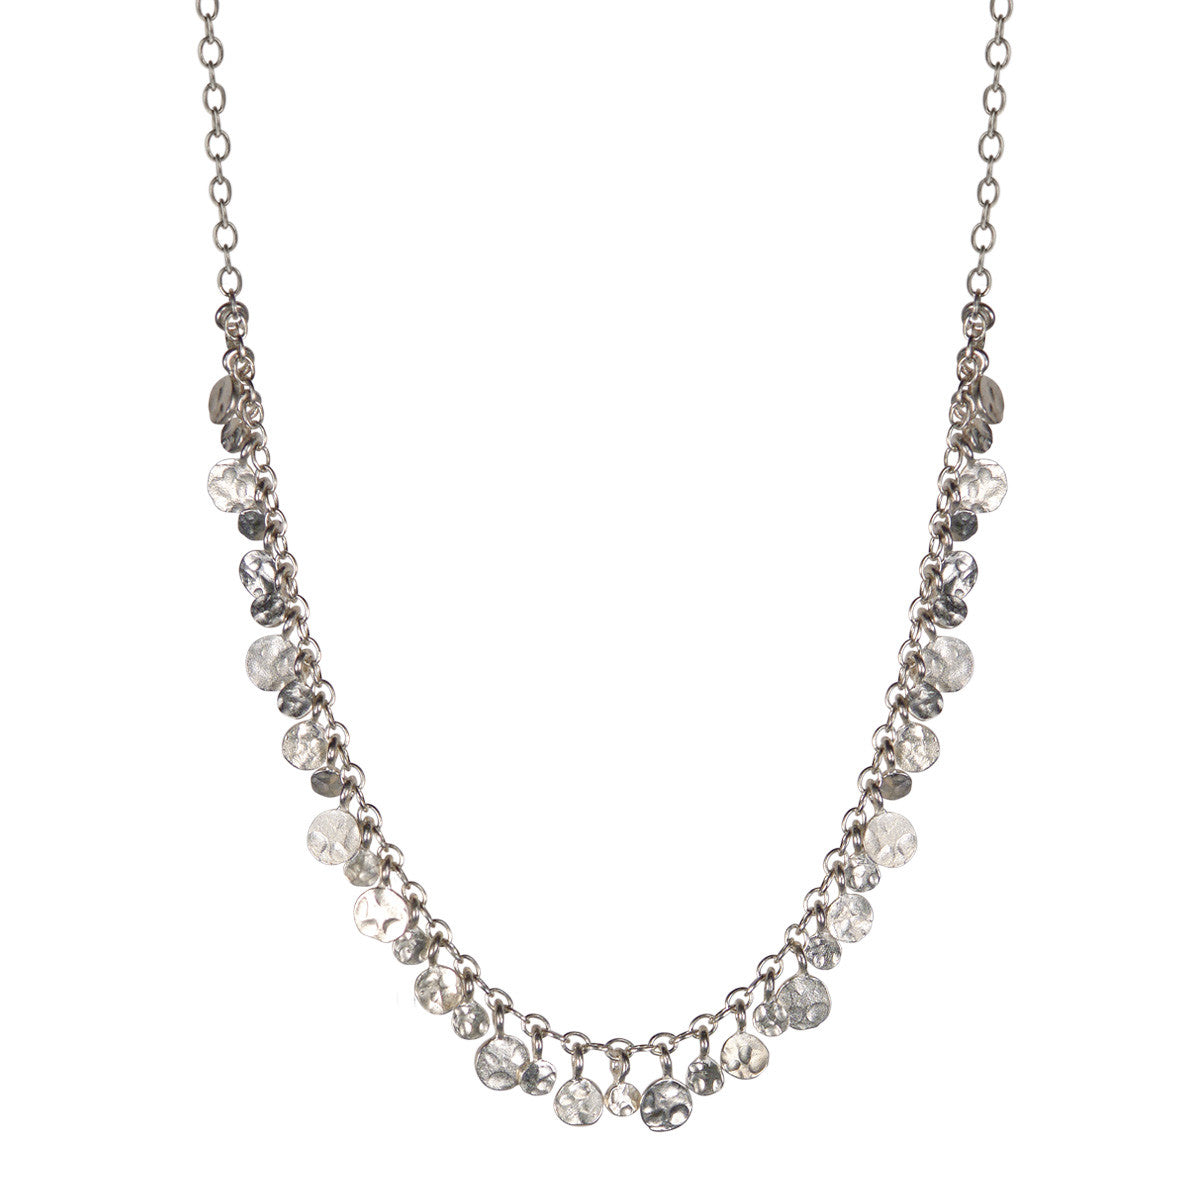 Jewelry for Moms - Three Disc Necklace in Sterling Silver - MYKA